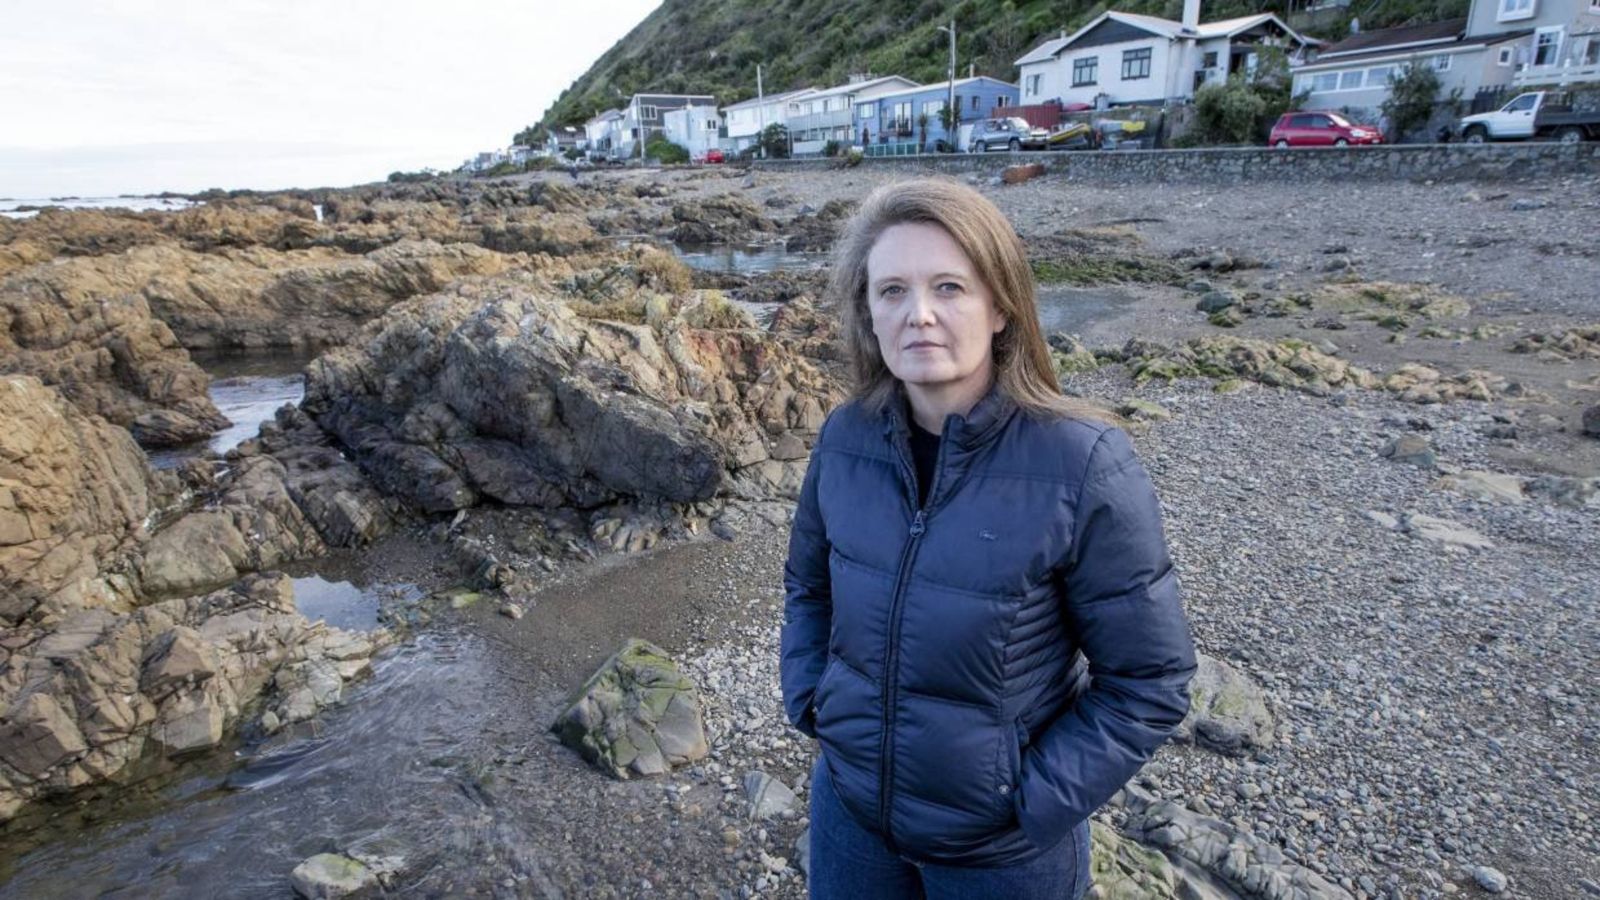 Phd candidate, Belinda Storey wearing a black jacket, standing on a beach in front of rocks on a cloudy day at Owhiro Bay. Houses and cars are on the street in the background. Photo: Monique Ford.